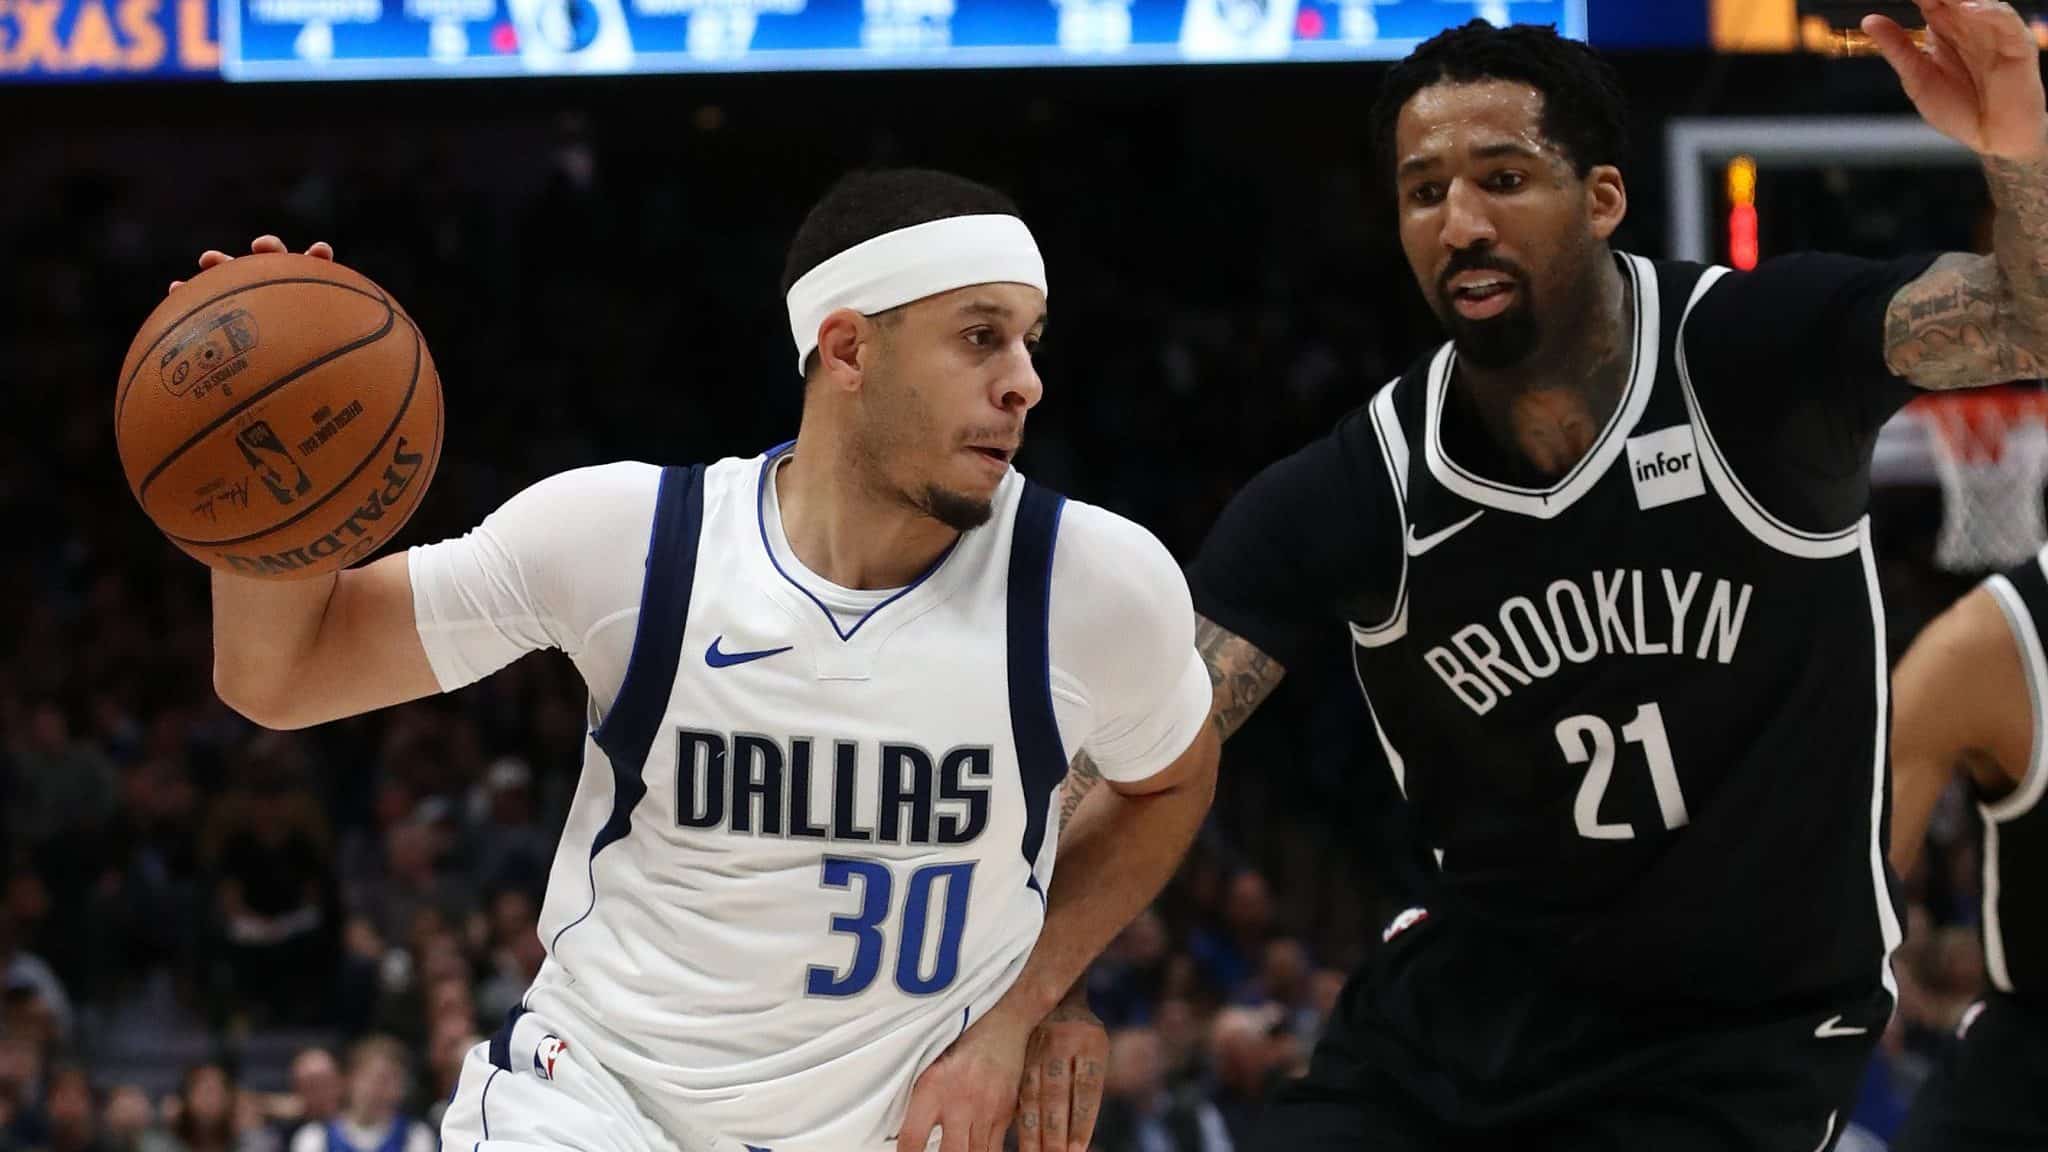 DALLAS, TEXAS - JANUARY 02: Seth Curry #30 of the Dallas Mavericks dribbles the ball against Wilson Chandler #21 of the Brooklyn Nets at American Airlines Center on January 02, 2020 in Dallas, Texas. NOTE TO USER: User expressly acknowledges and agrees that, by downloading and or using this photograph, User is consenting to the terms and conditions of the Getty Images License Agreement.